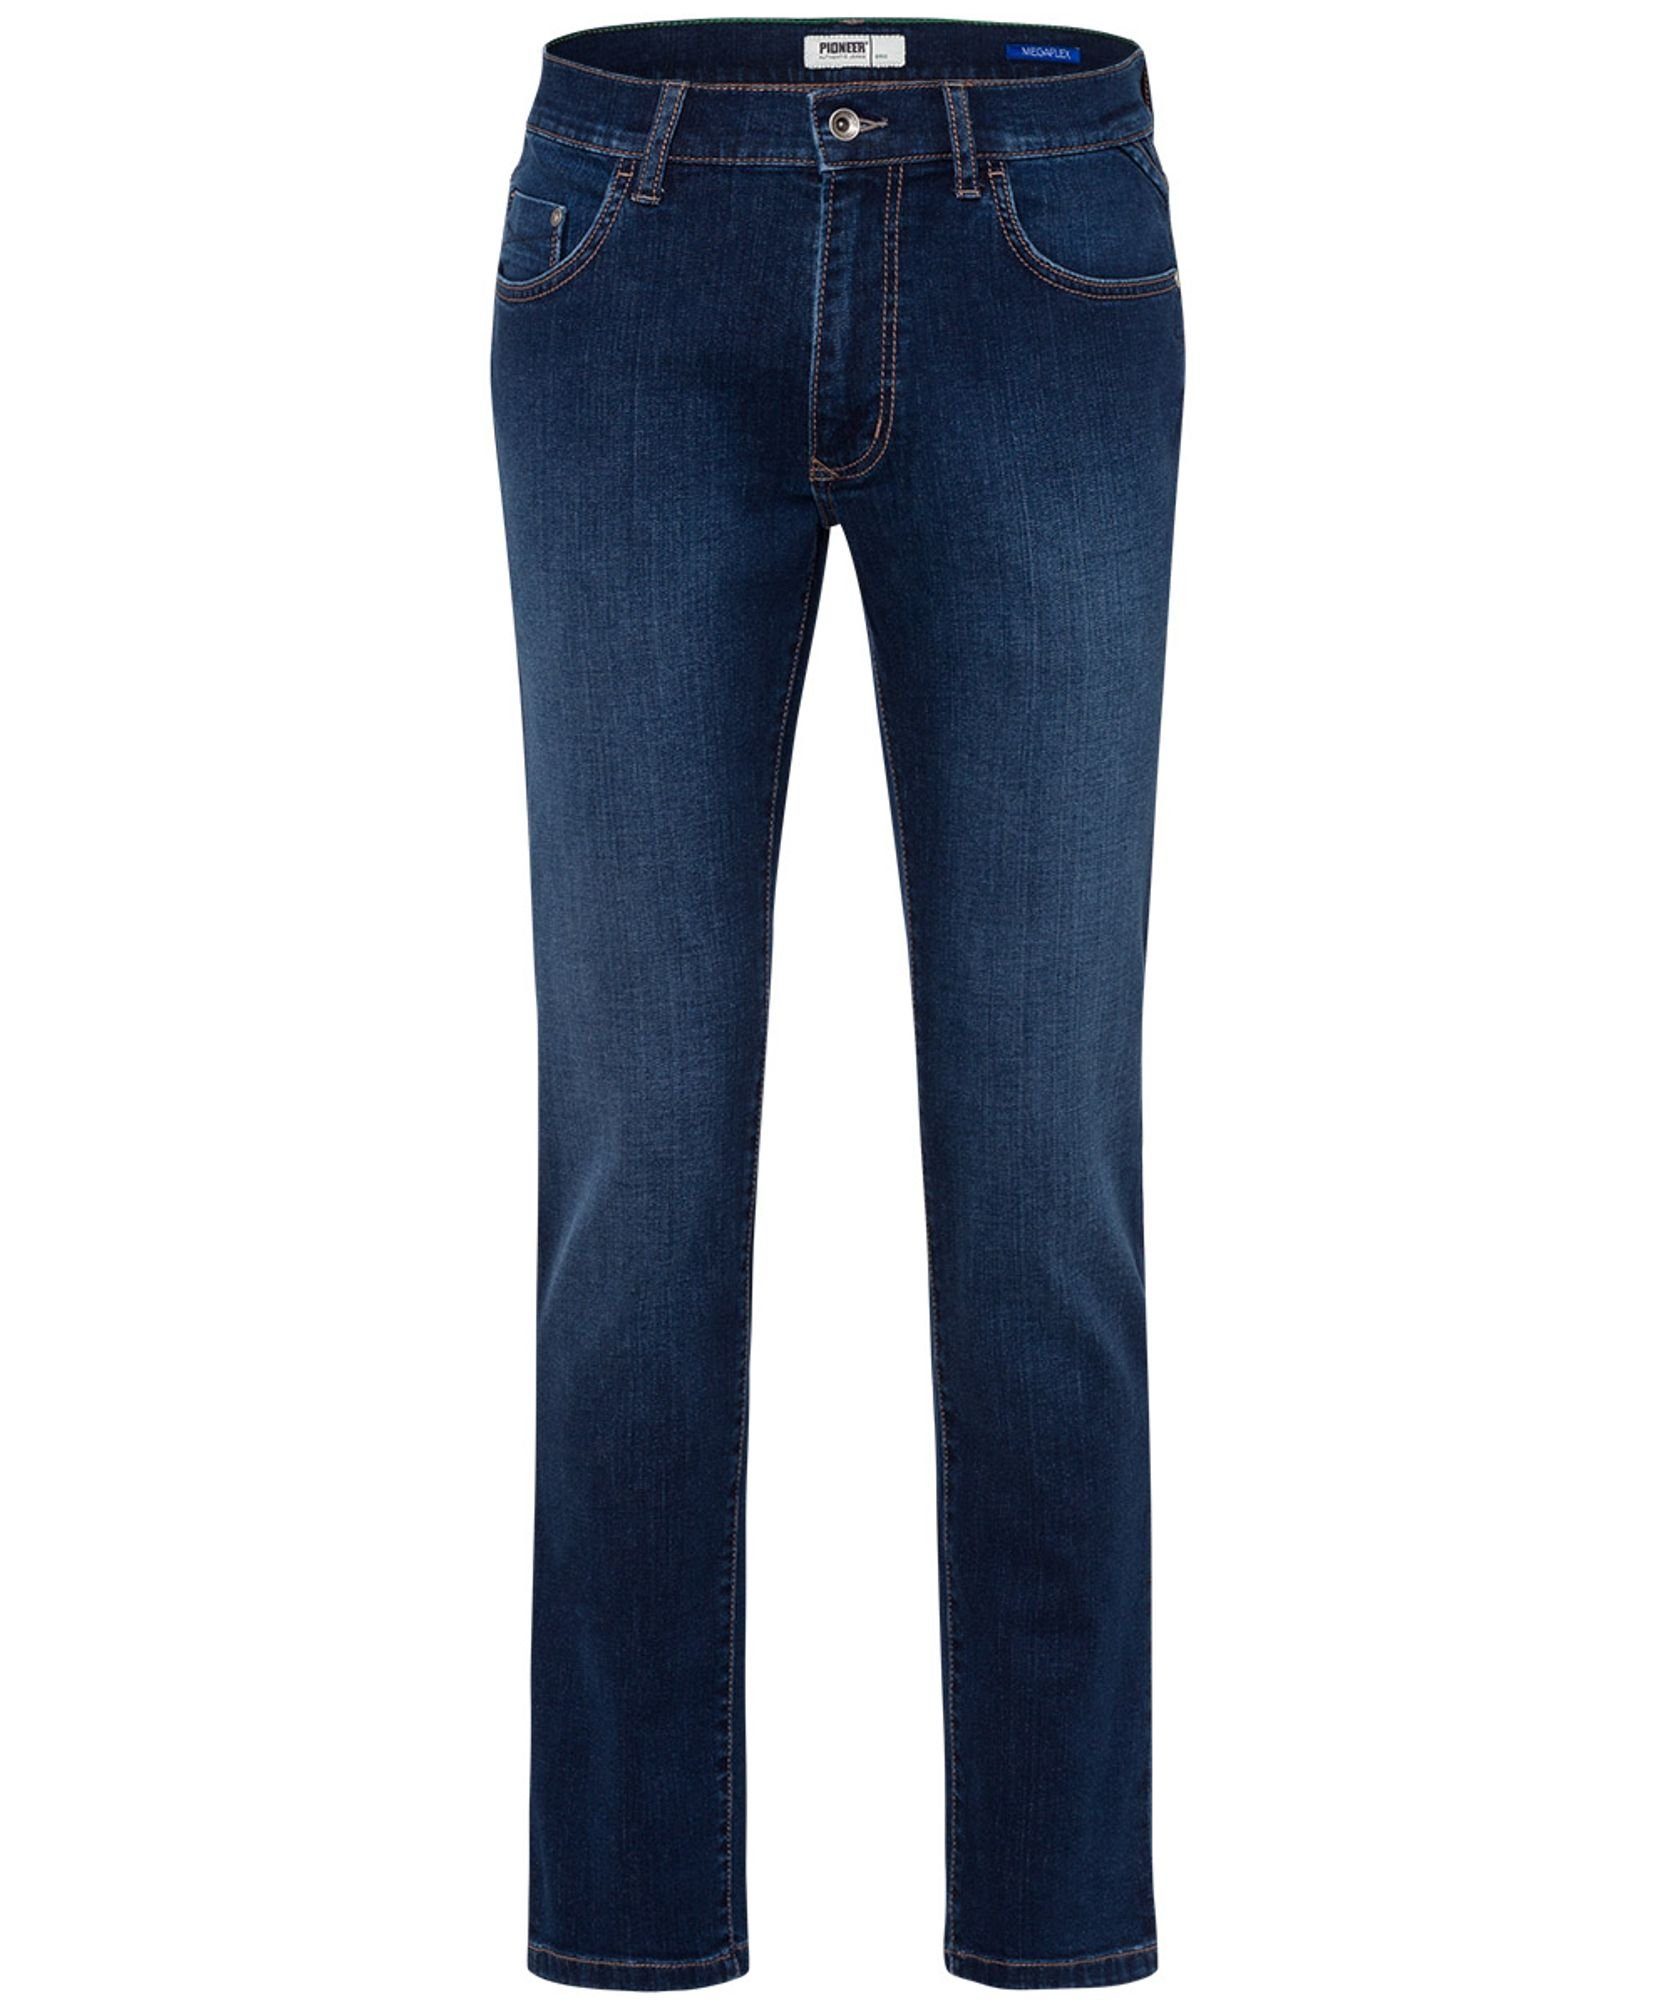 Pioneer Authentic Jeans 5-Pocket-Jeans PO 16161.6580 Megaflex Dark blue used (6812) | Straight-Fit Jeans